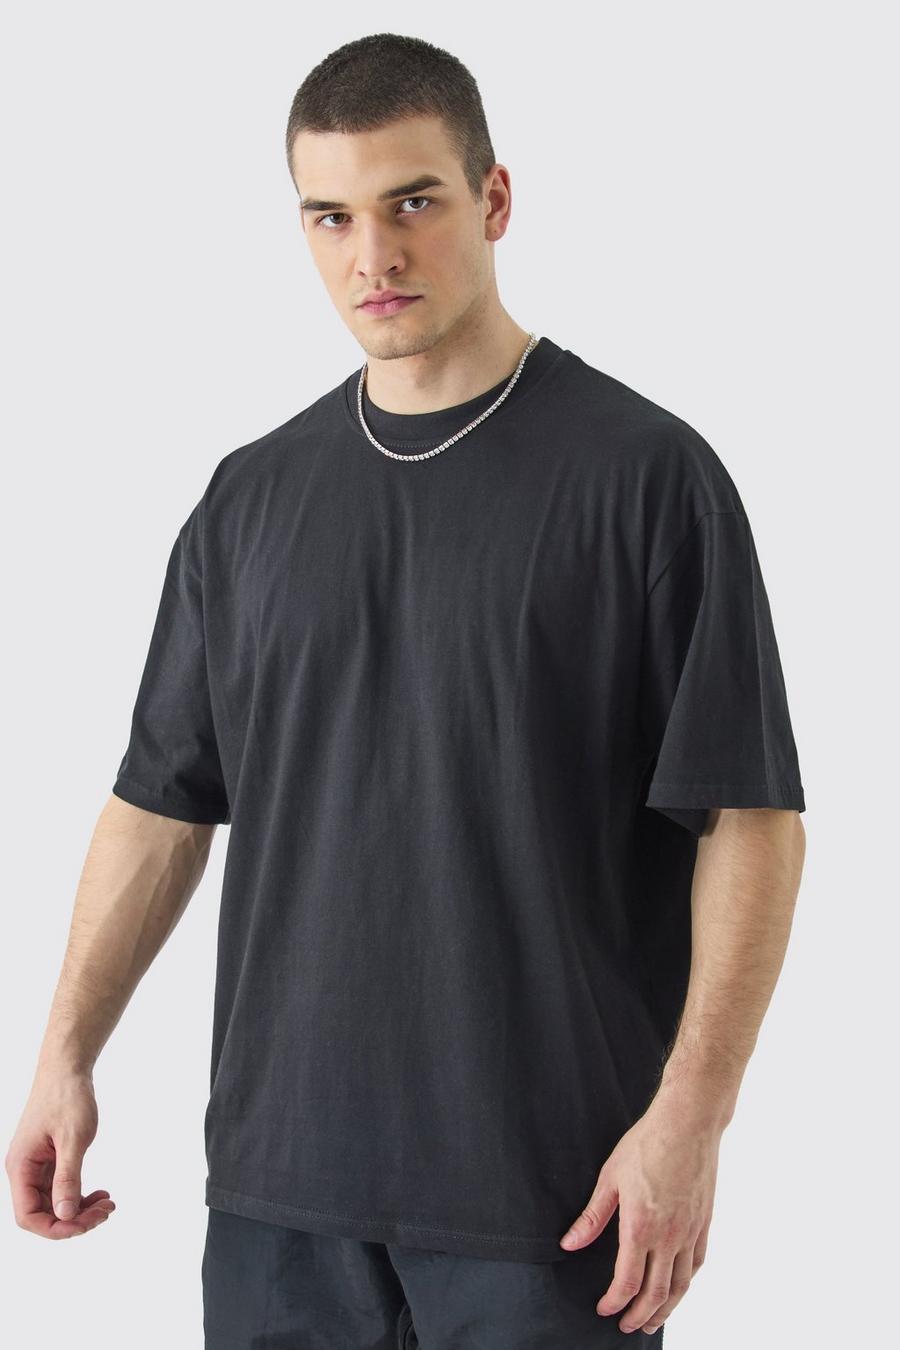 Extra Long T-Shirts For Tall Men